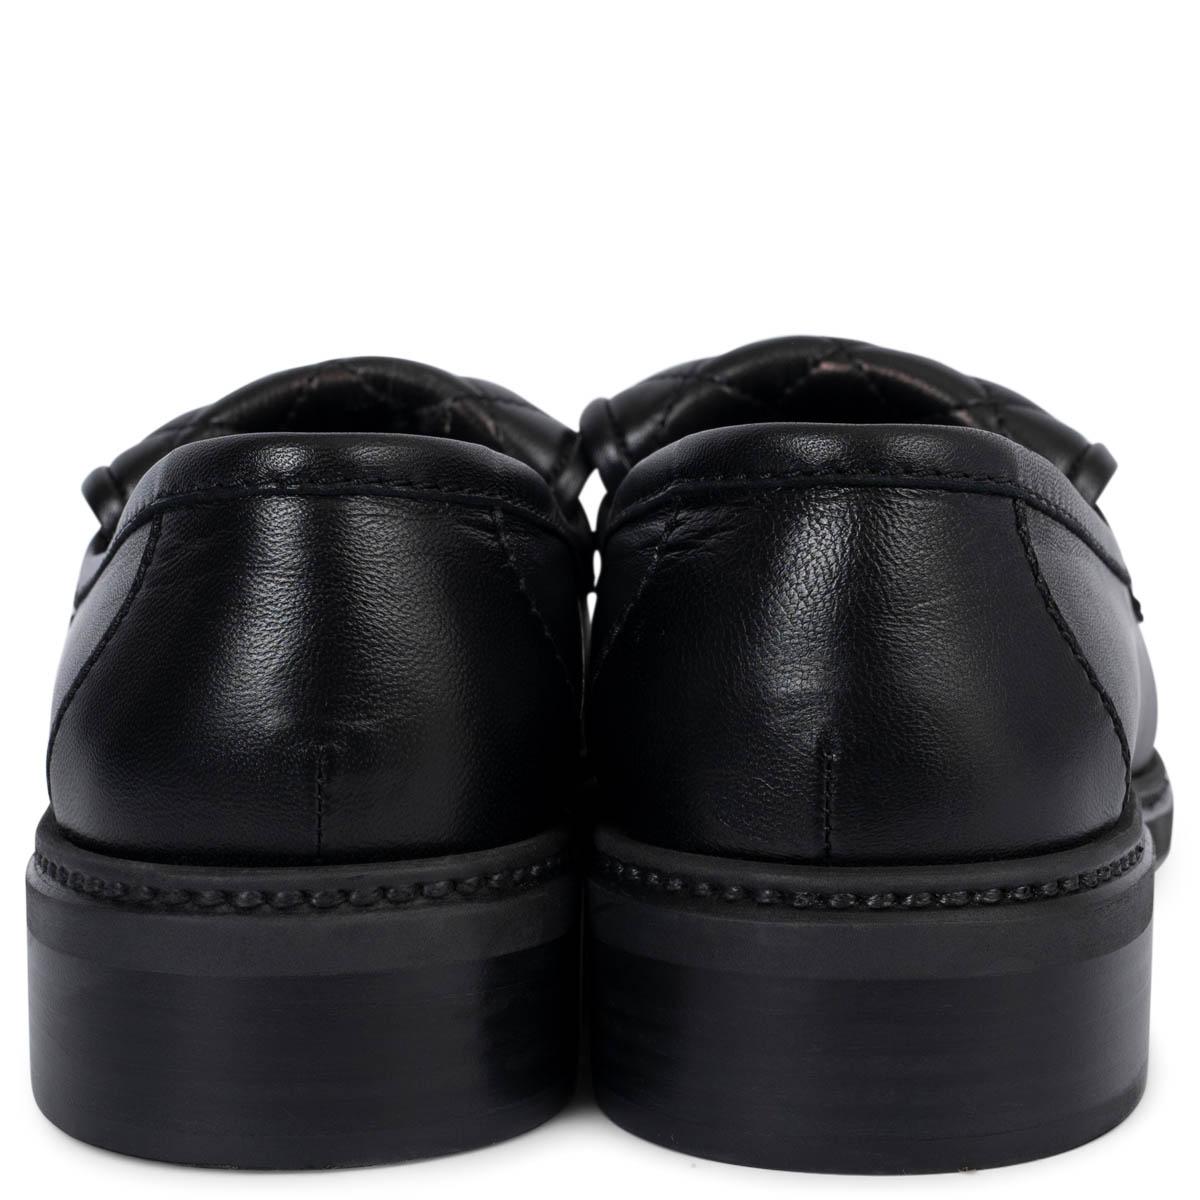 CHANEL black leather REV TURNLOCK Loafers Shoes 39 1